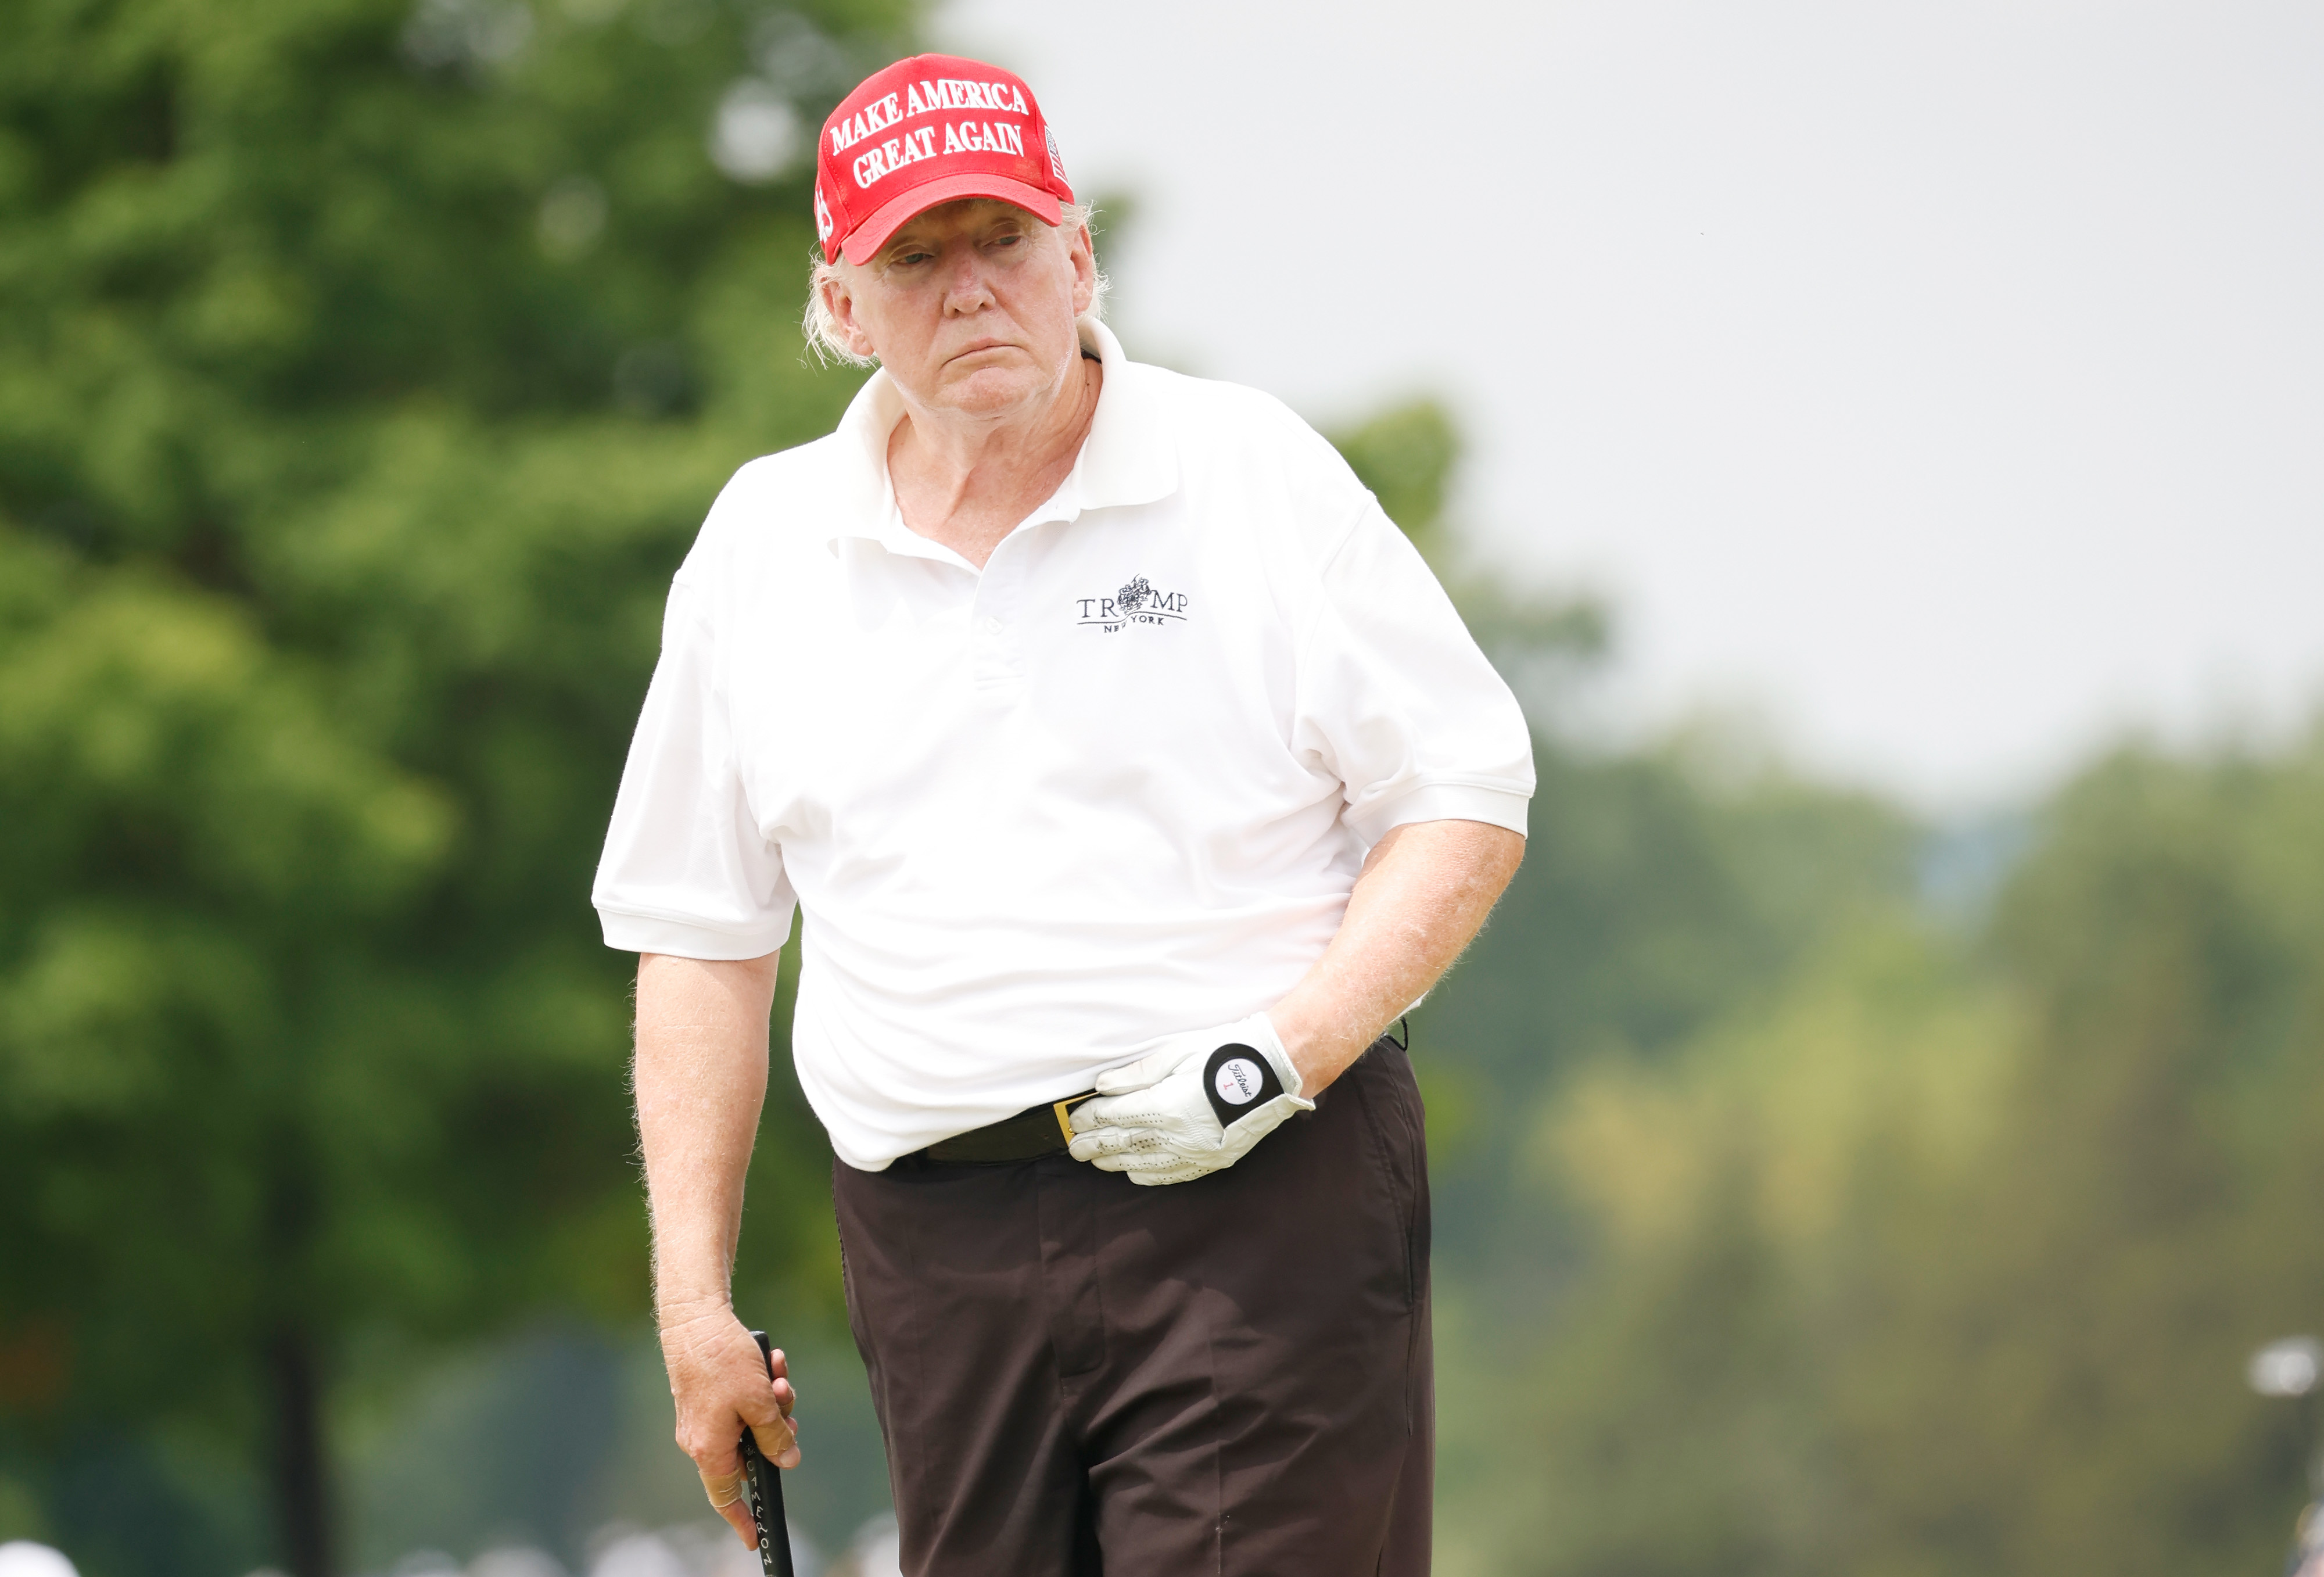 Former U.S. President Donald Trump reacts to a putt on the 15th green during the pro-am prior to the LIV Golf Invitational - Bedminster at Trump National Golf Club Bedminster on July 28, 2022 in Bedminster, New Jersey. (Cliff Hawkins—Getty Images)